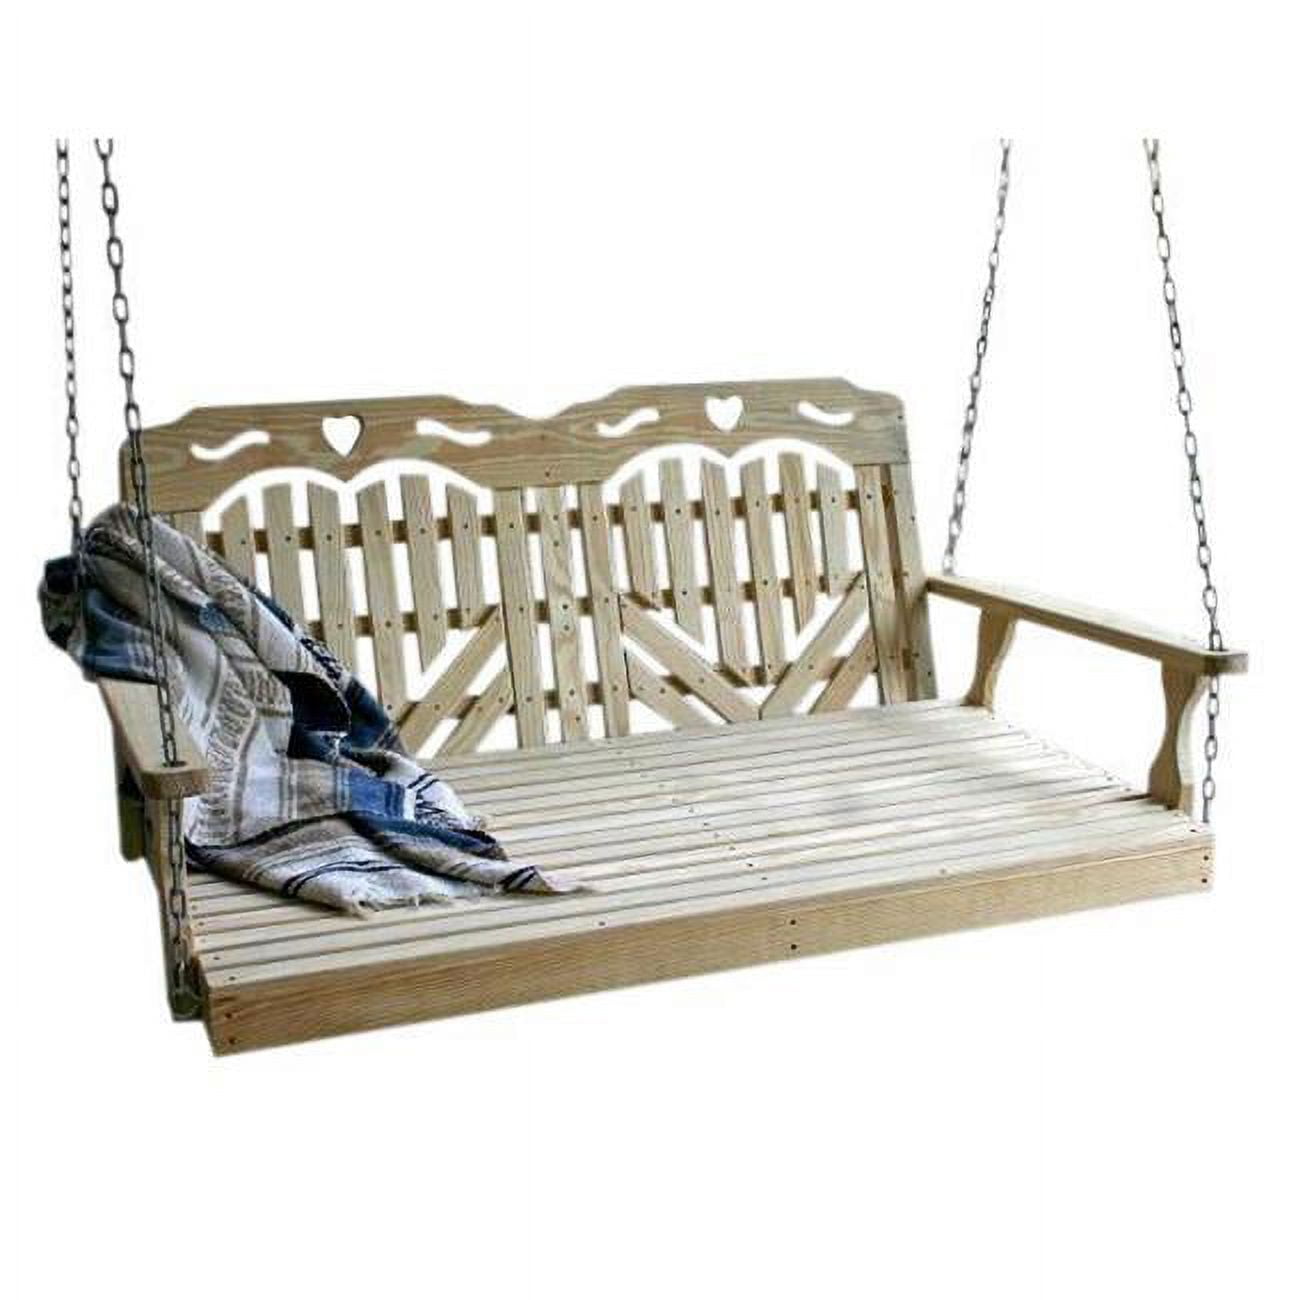 Picture of Creekvine Designs FTSBED60HHCVD 60 in. Treated Pine Heartback with Hearts Swingbed